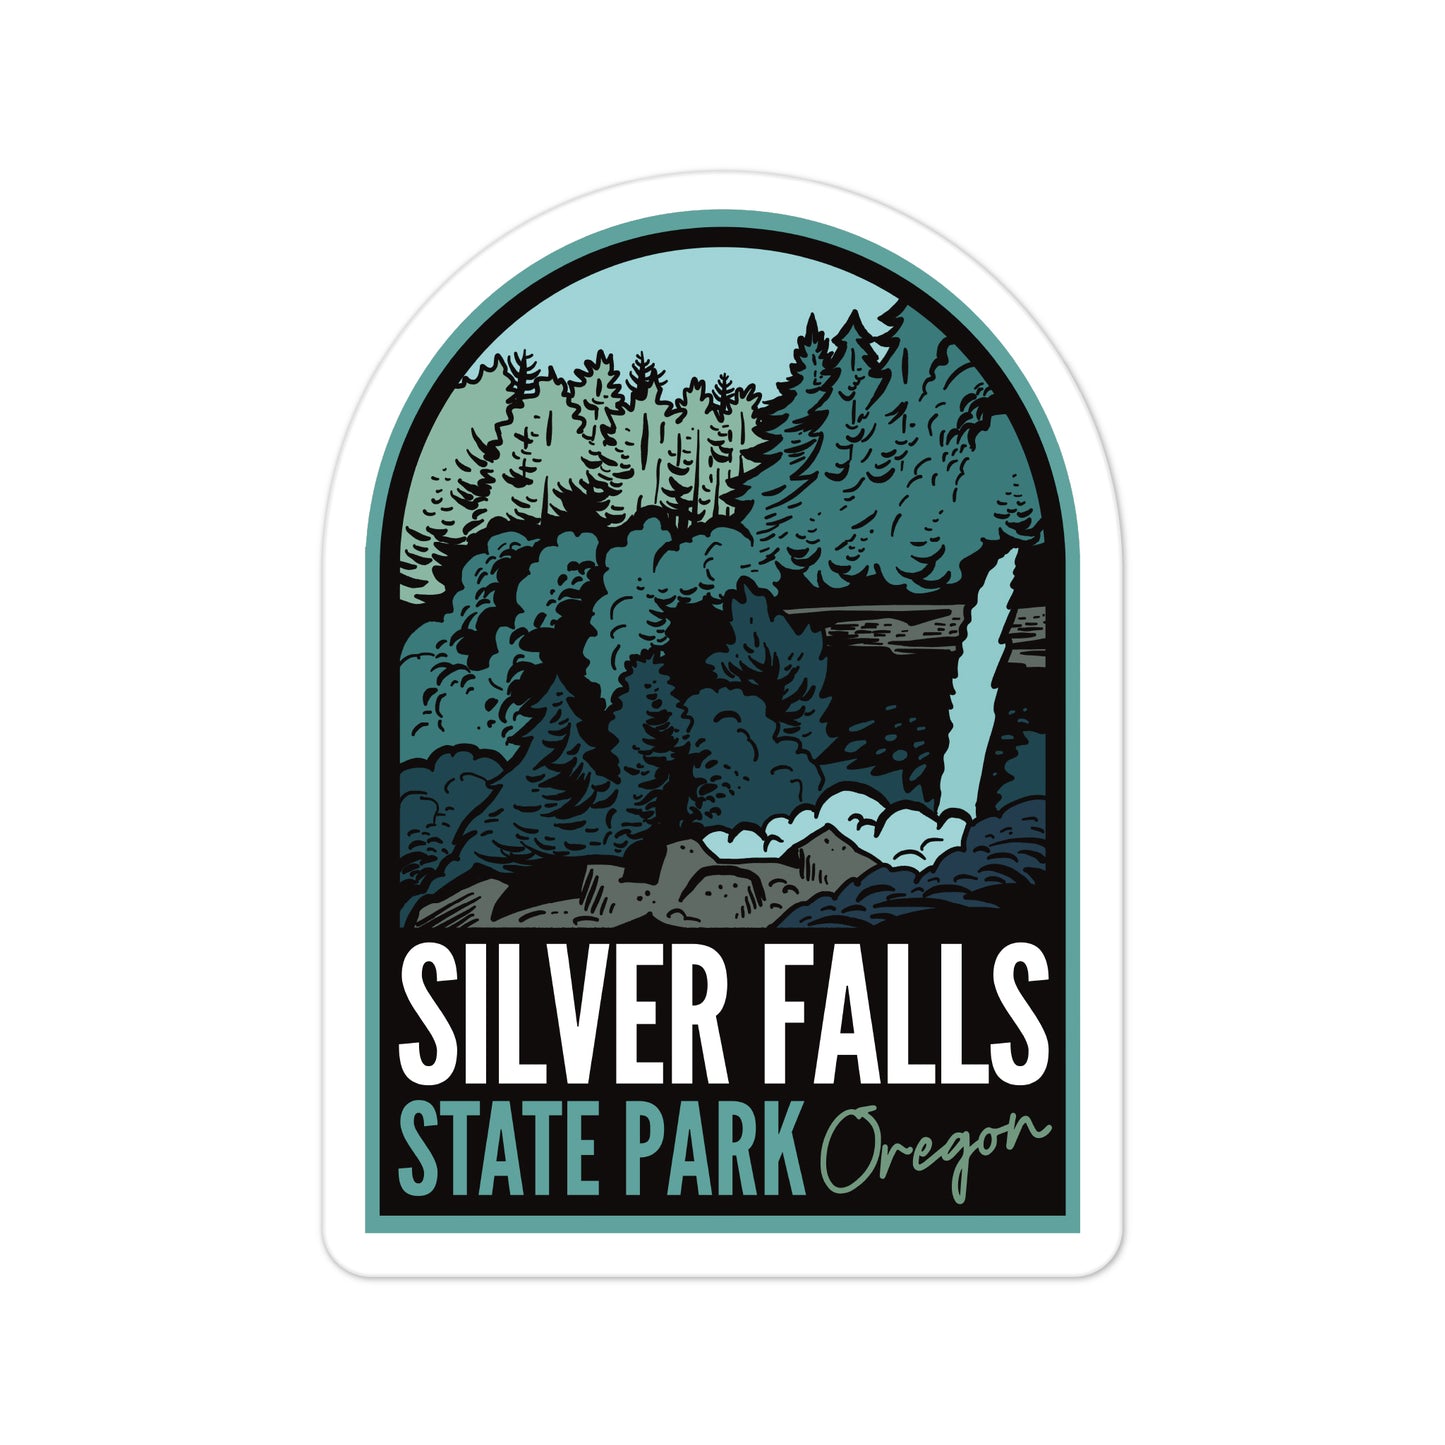 A sticker of Silver Falls State Park